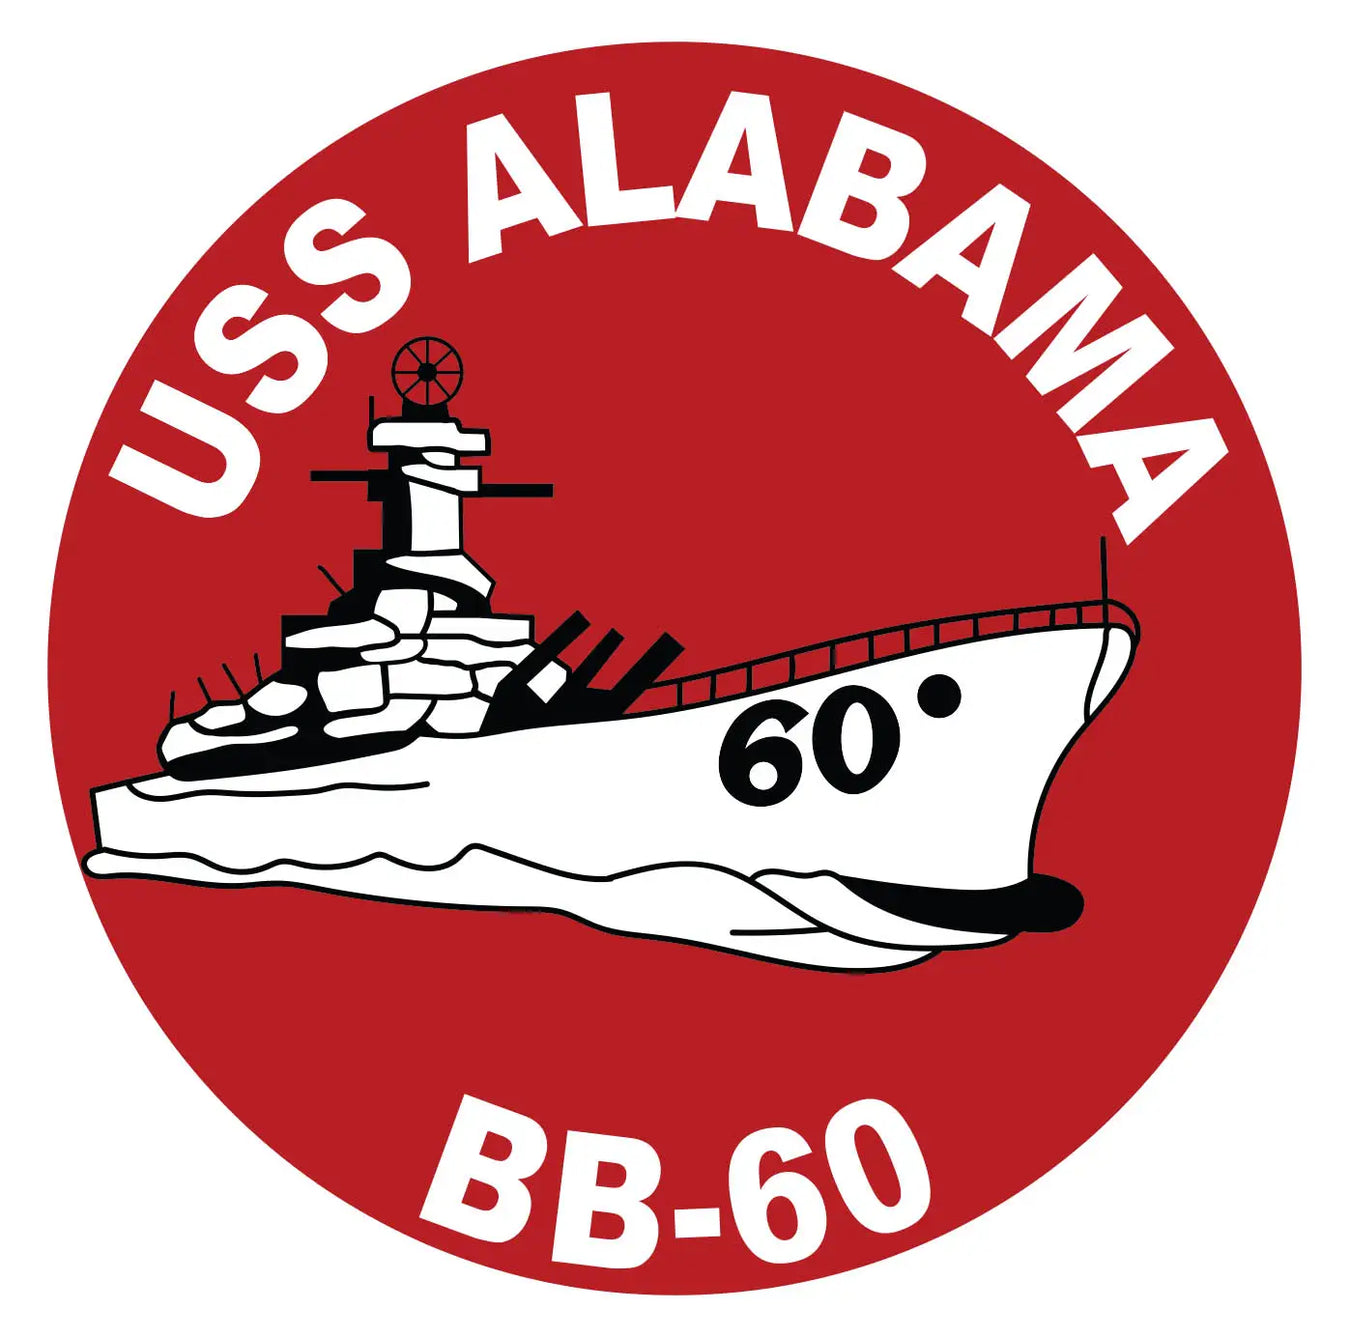 USS Alabama (BB-60) Merchandise - Shop T-Shirts, hoodies, patches, pins, flags, decals, hats and more.